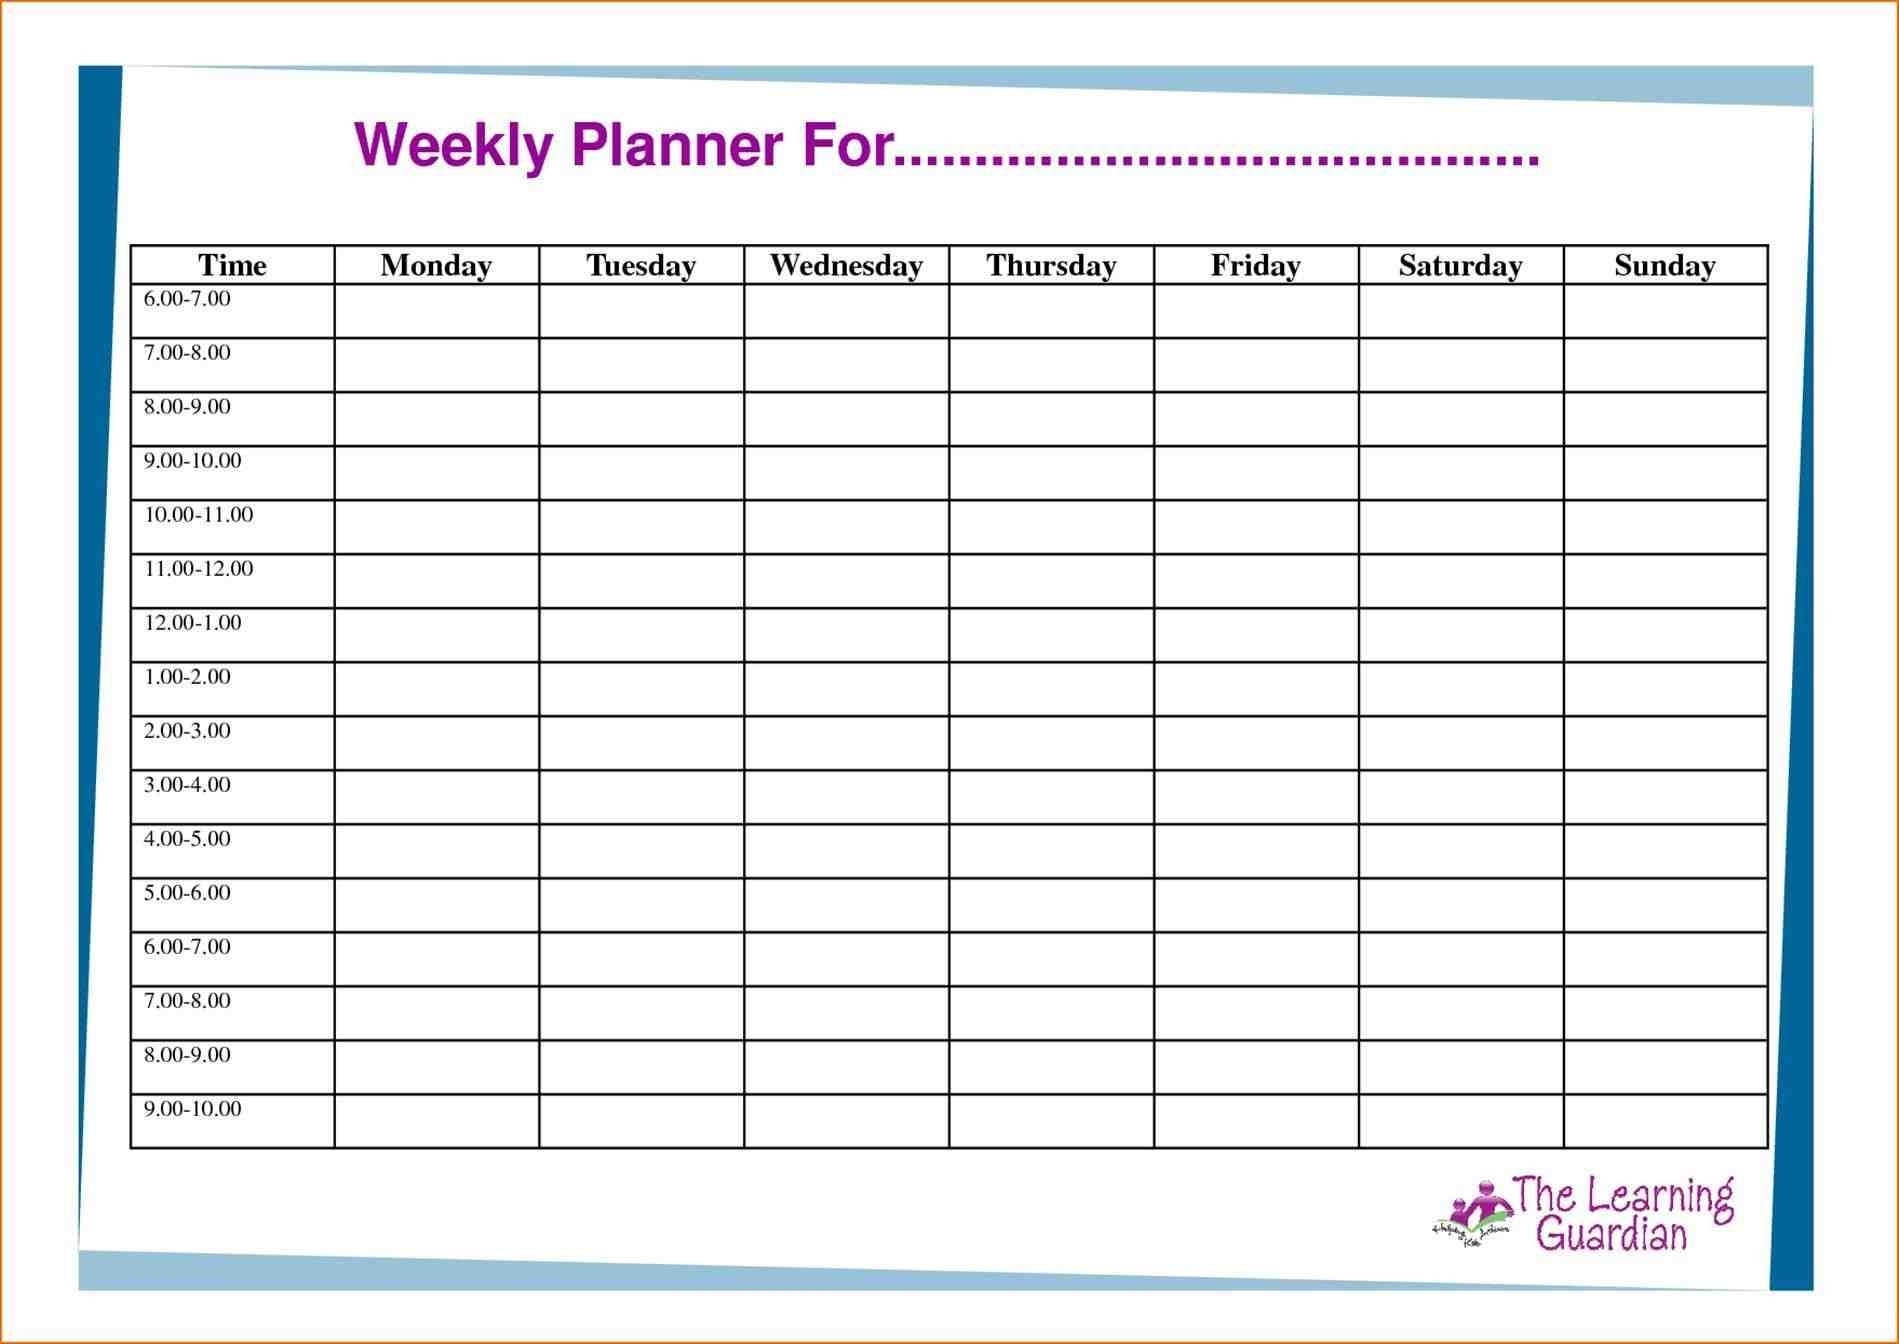 Calendar Planner Template Weekly Schedule And Task Planner Calendar within Weekly Planner Template For Students